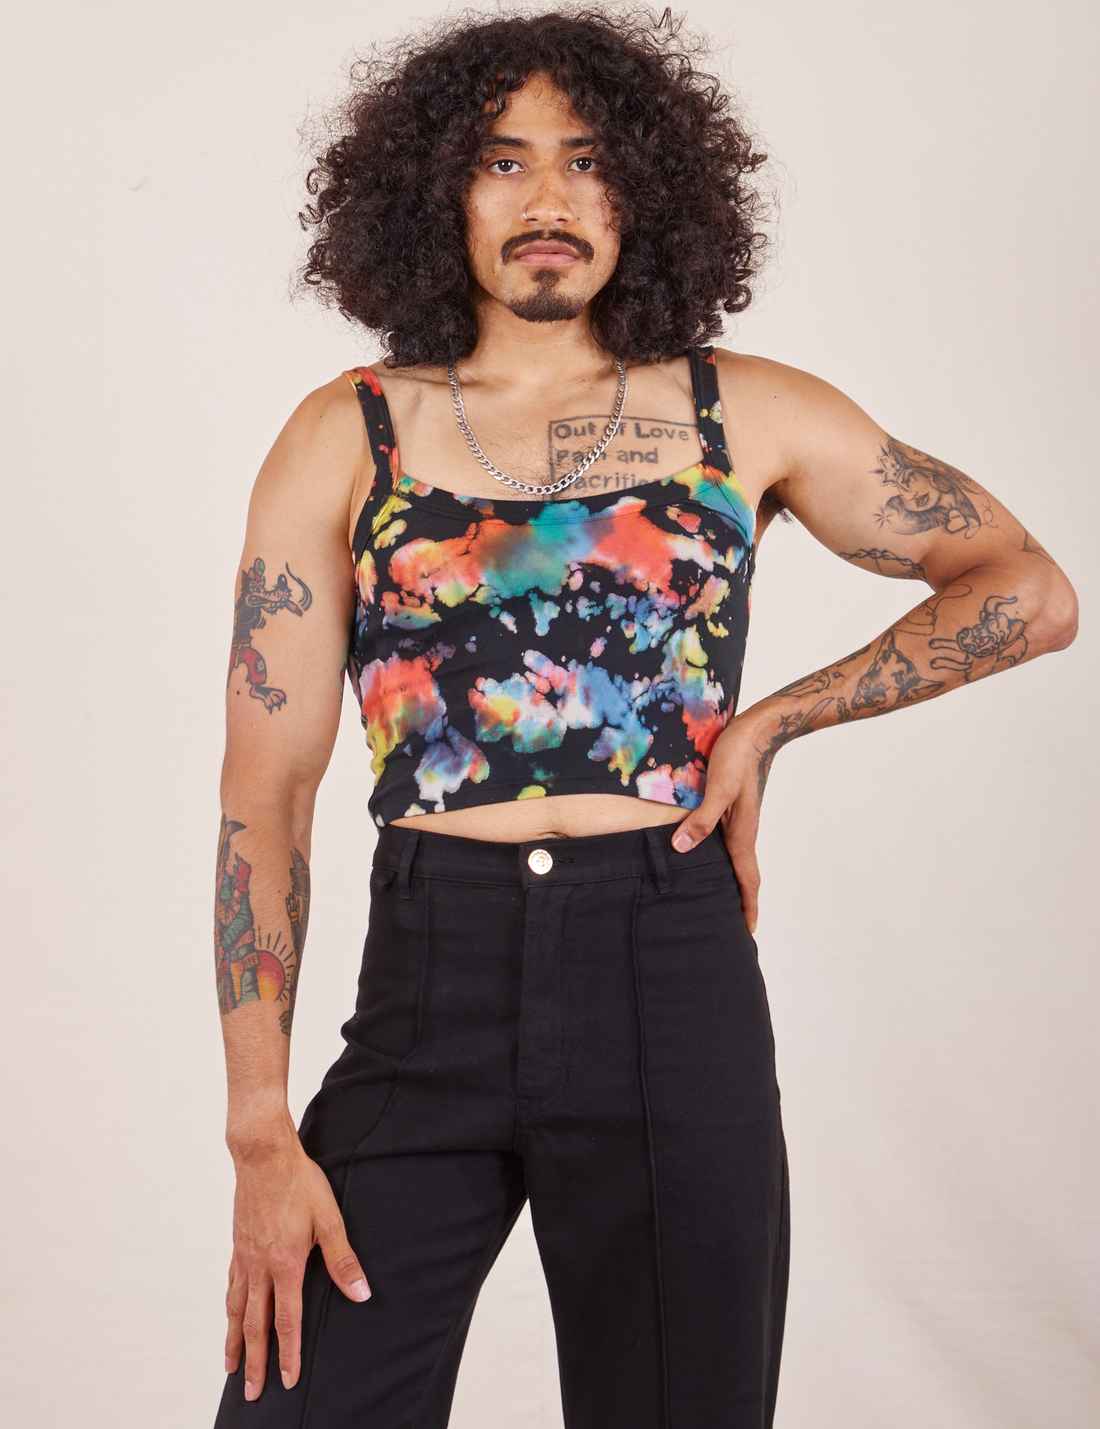 Jesse is 5'8" and wearing XS Cropped Cami in Rainbow Magic Waters paired with black Western Pants